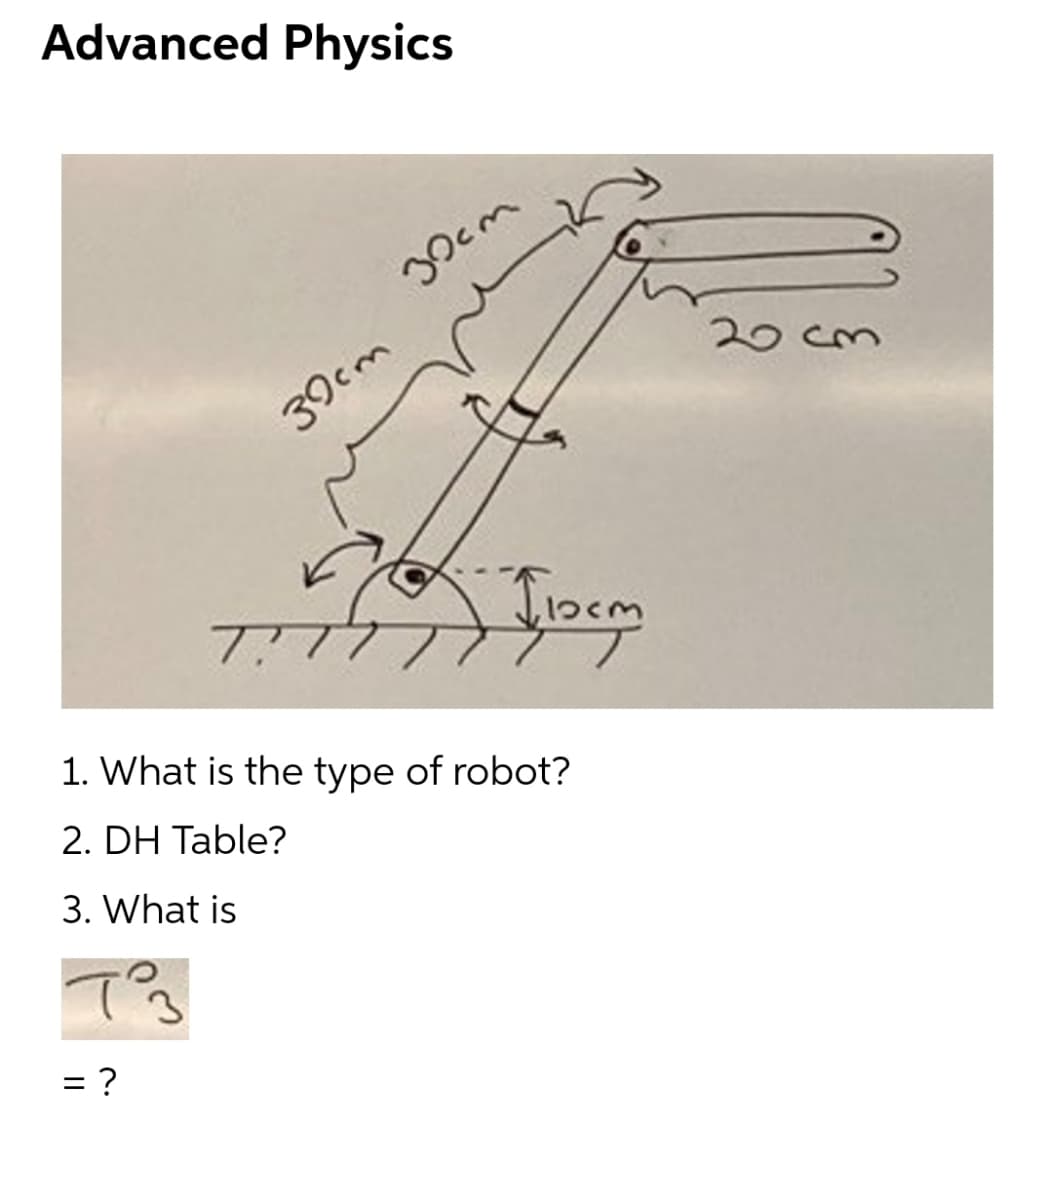 Advanced Physics
Jocm
20 cm
39cm
1. What is the type of robot?
2. DH Table?
3. What is
= ?
